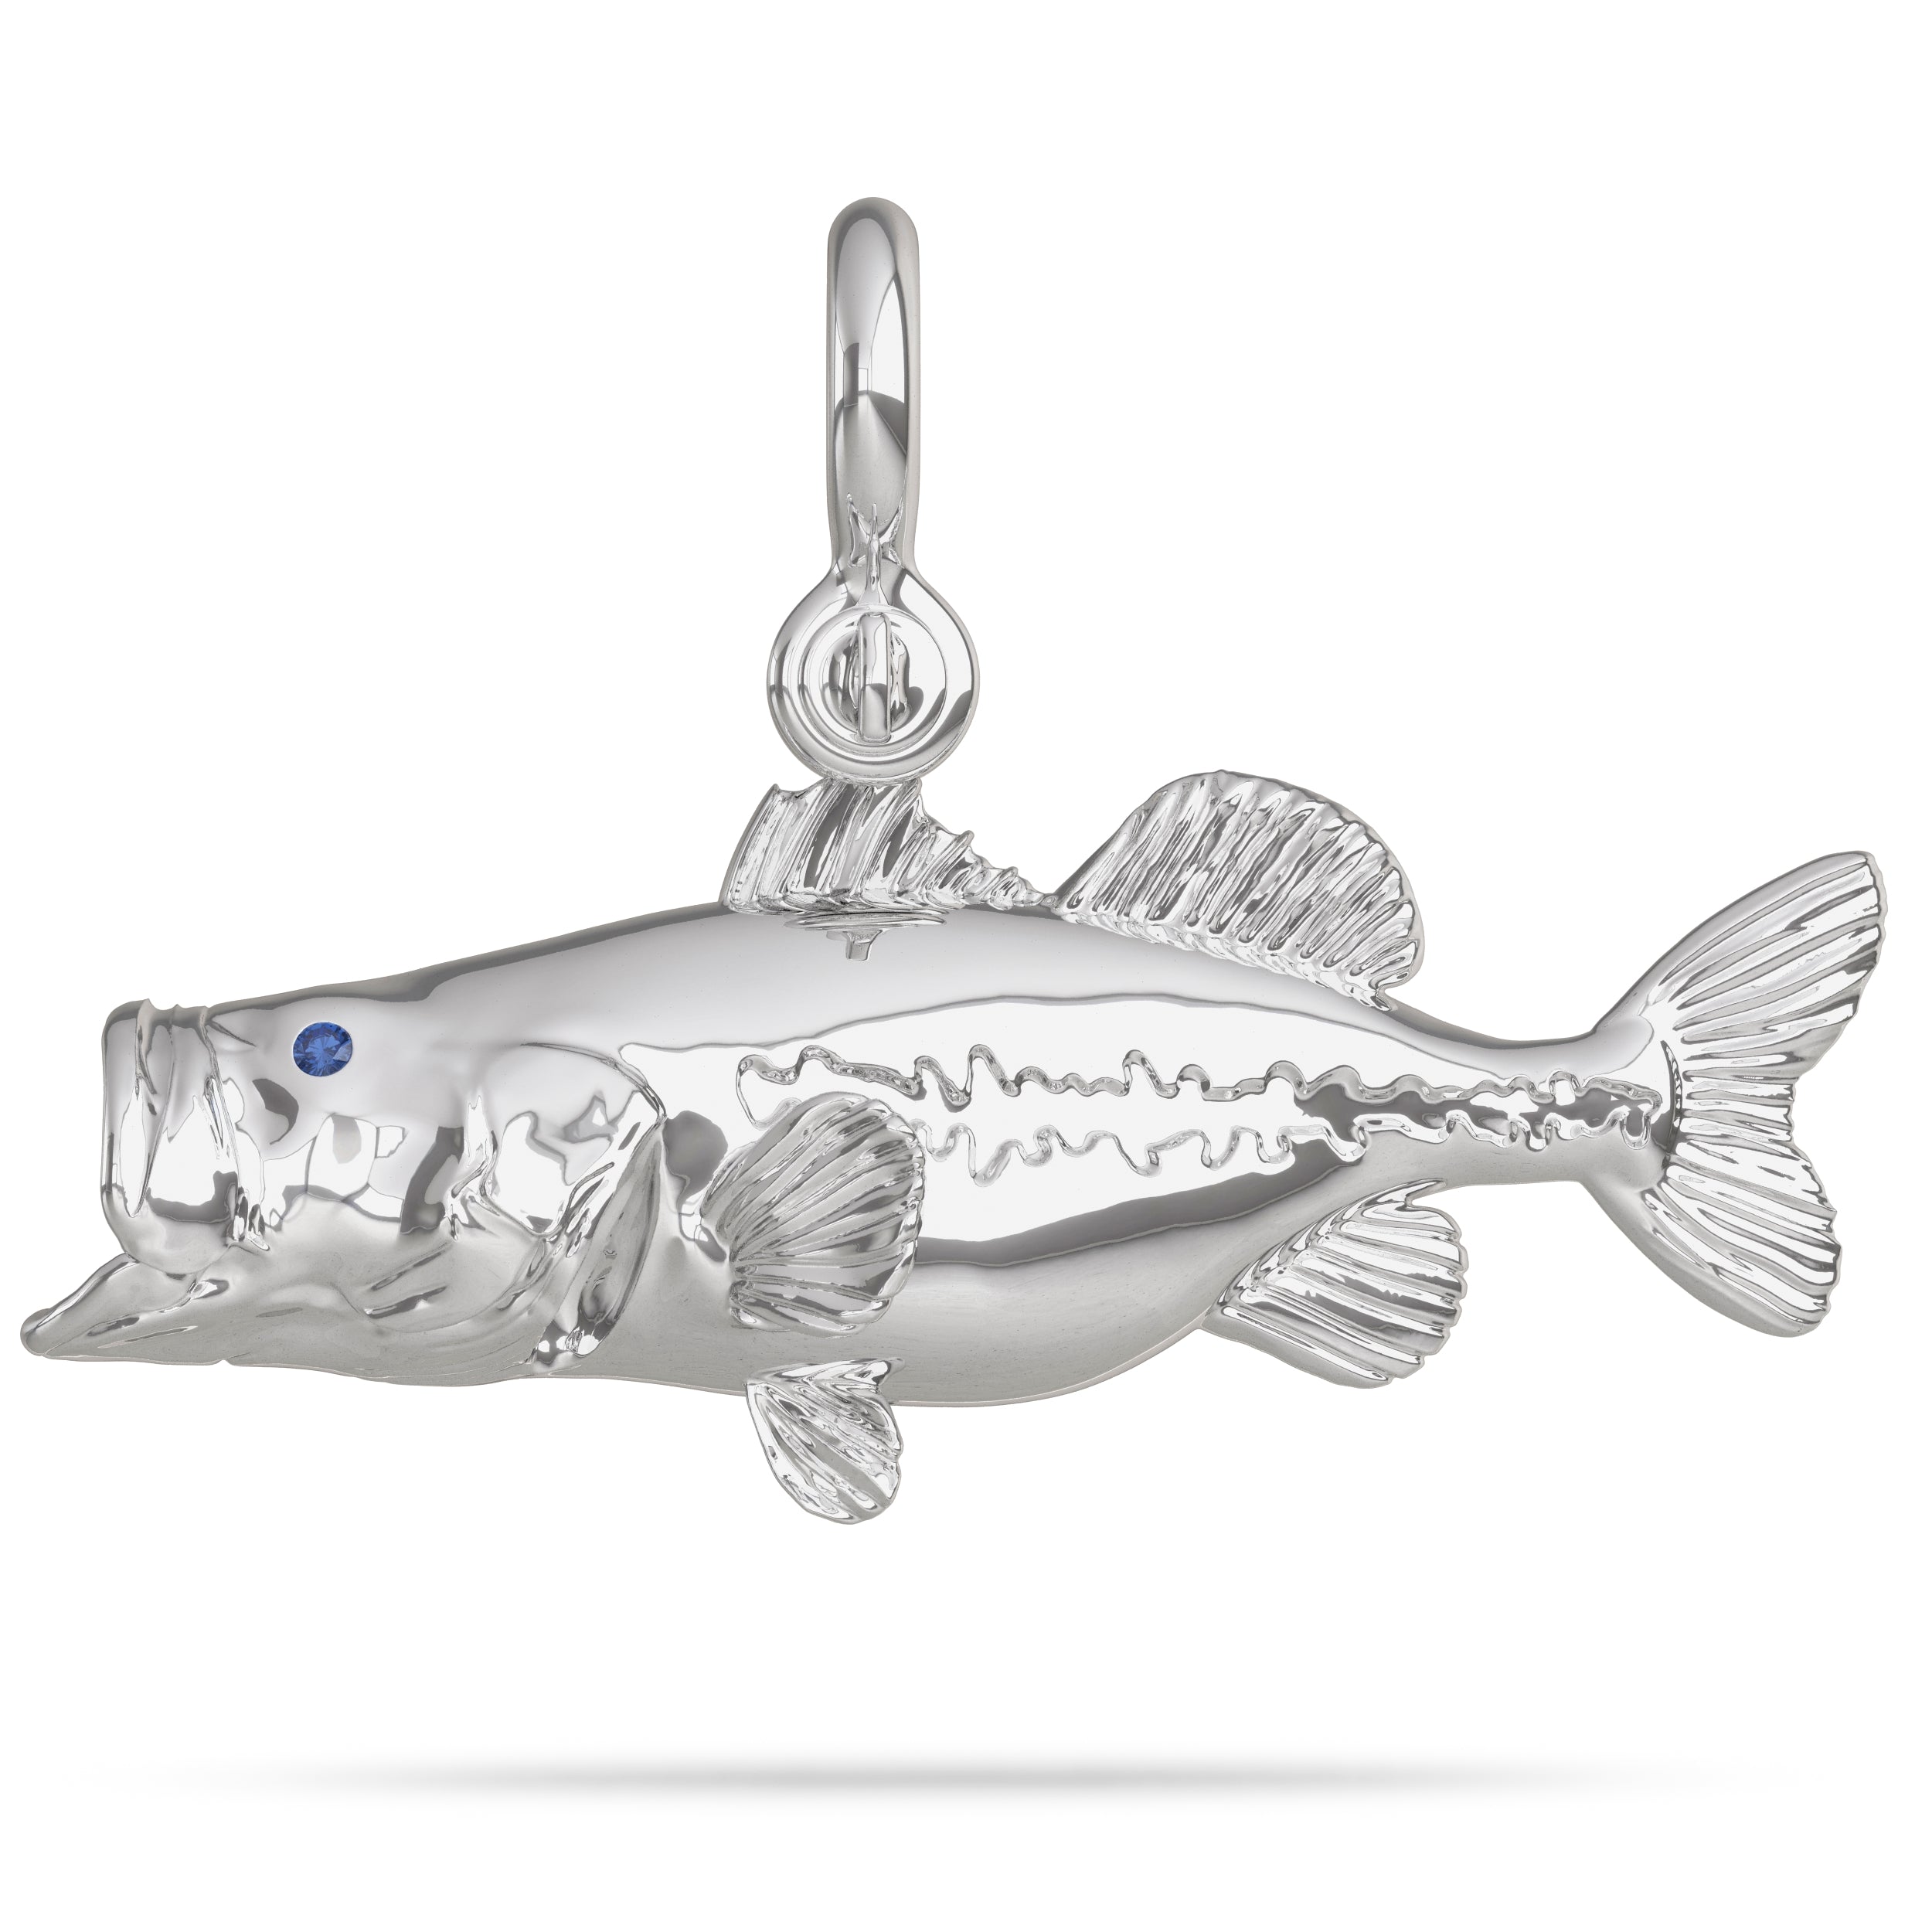 Largemouth Bass Hillbilly Deluxe I Nautical Treasure Jewelry Sterling Silver / Small (40mm) by Nautical Treasure Jewelry